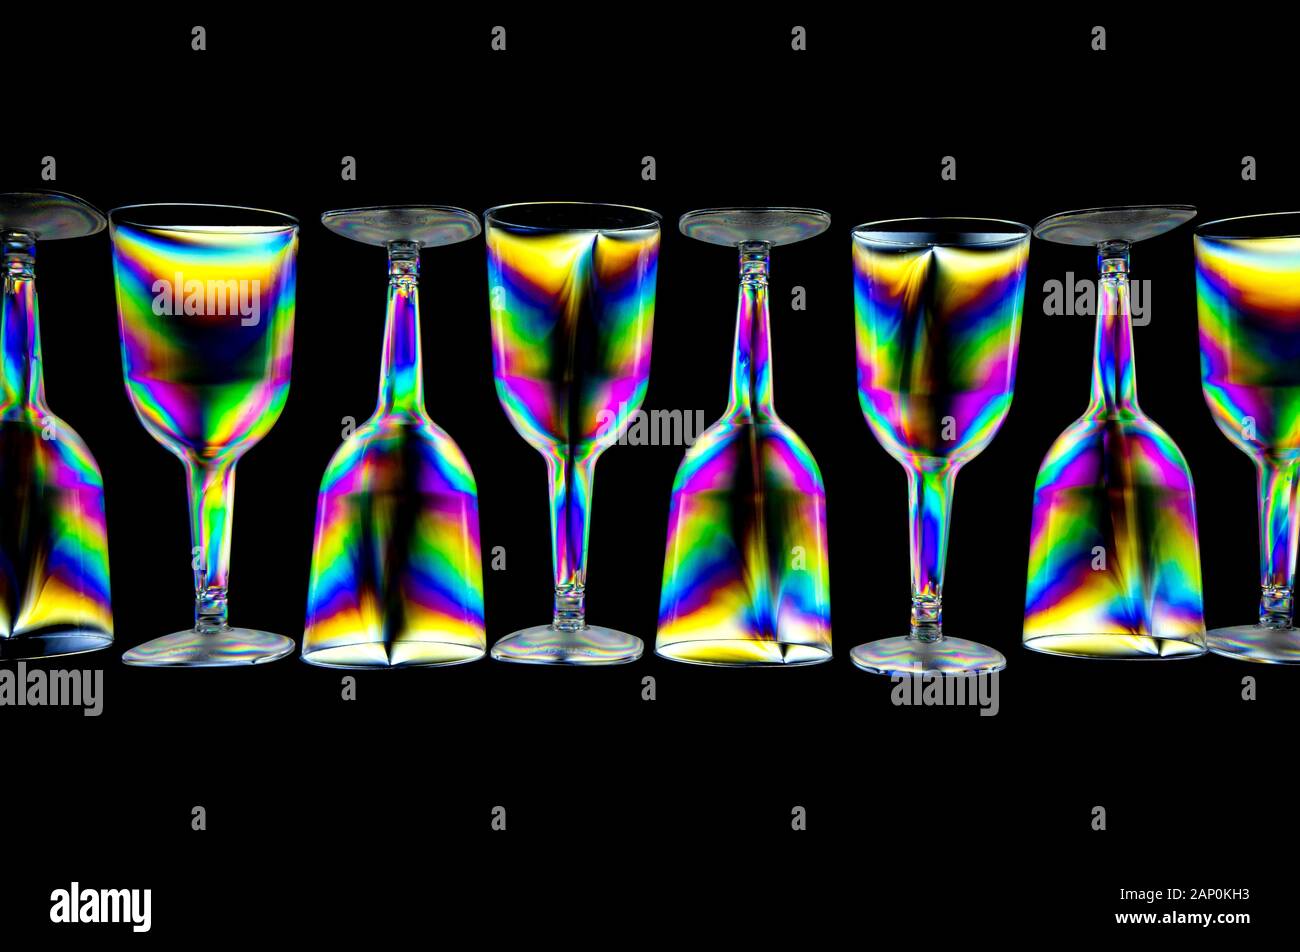 Colourful stress patterns in hard plastic, revealed by imaging between two crossed polarising filters. Stock Photo